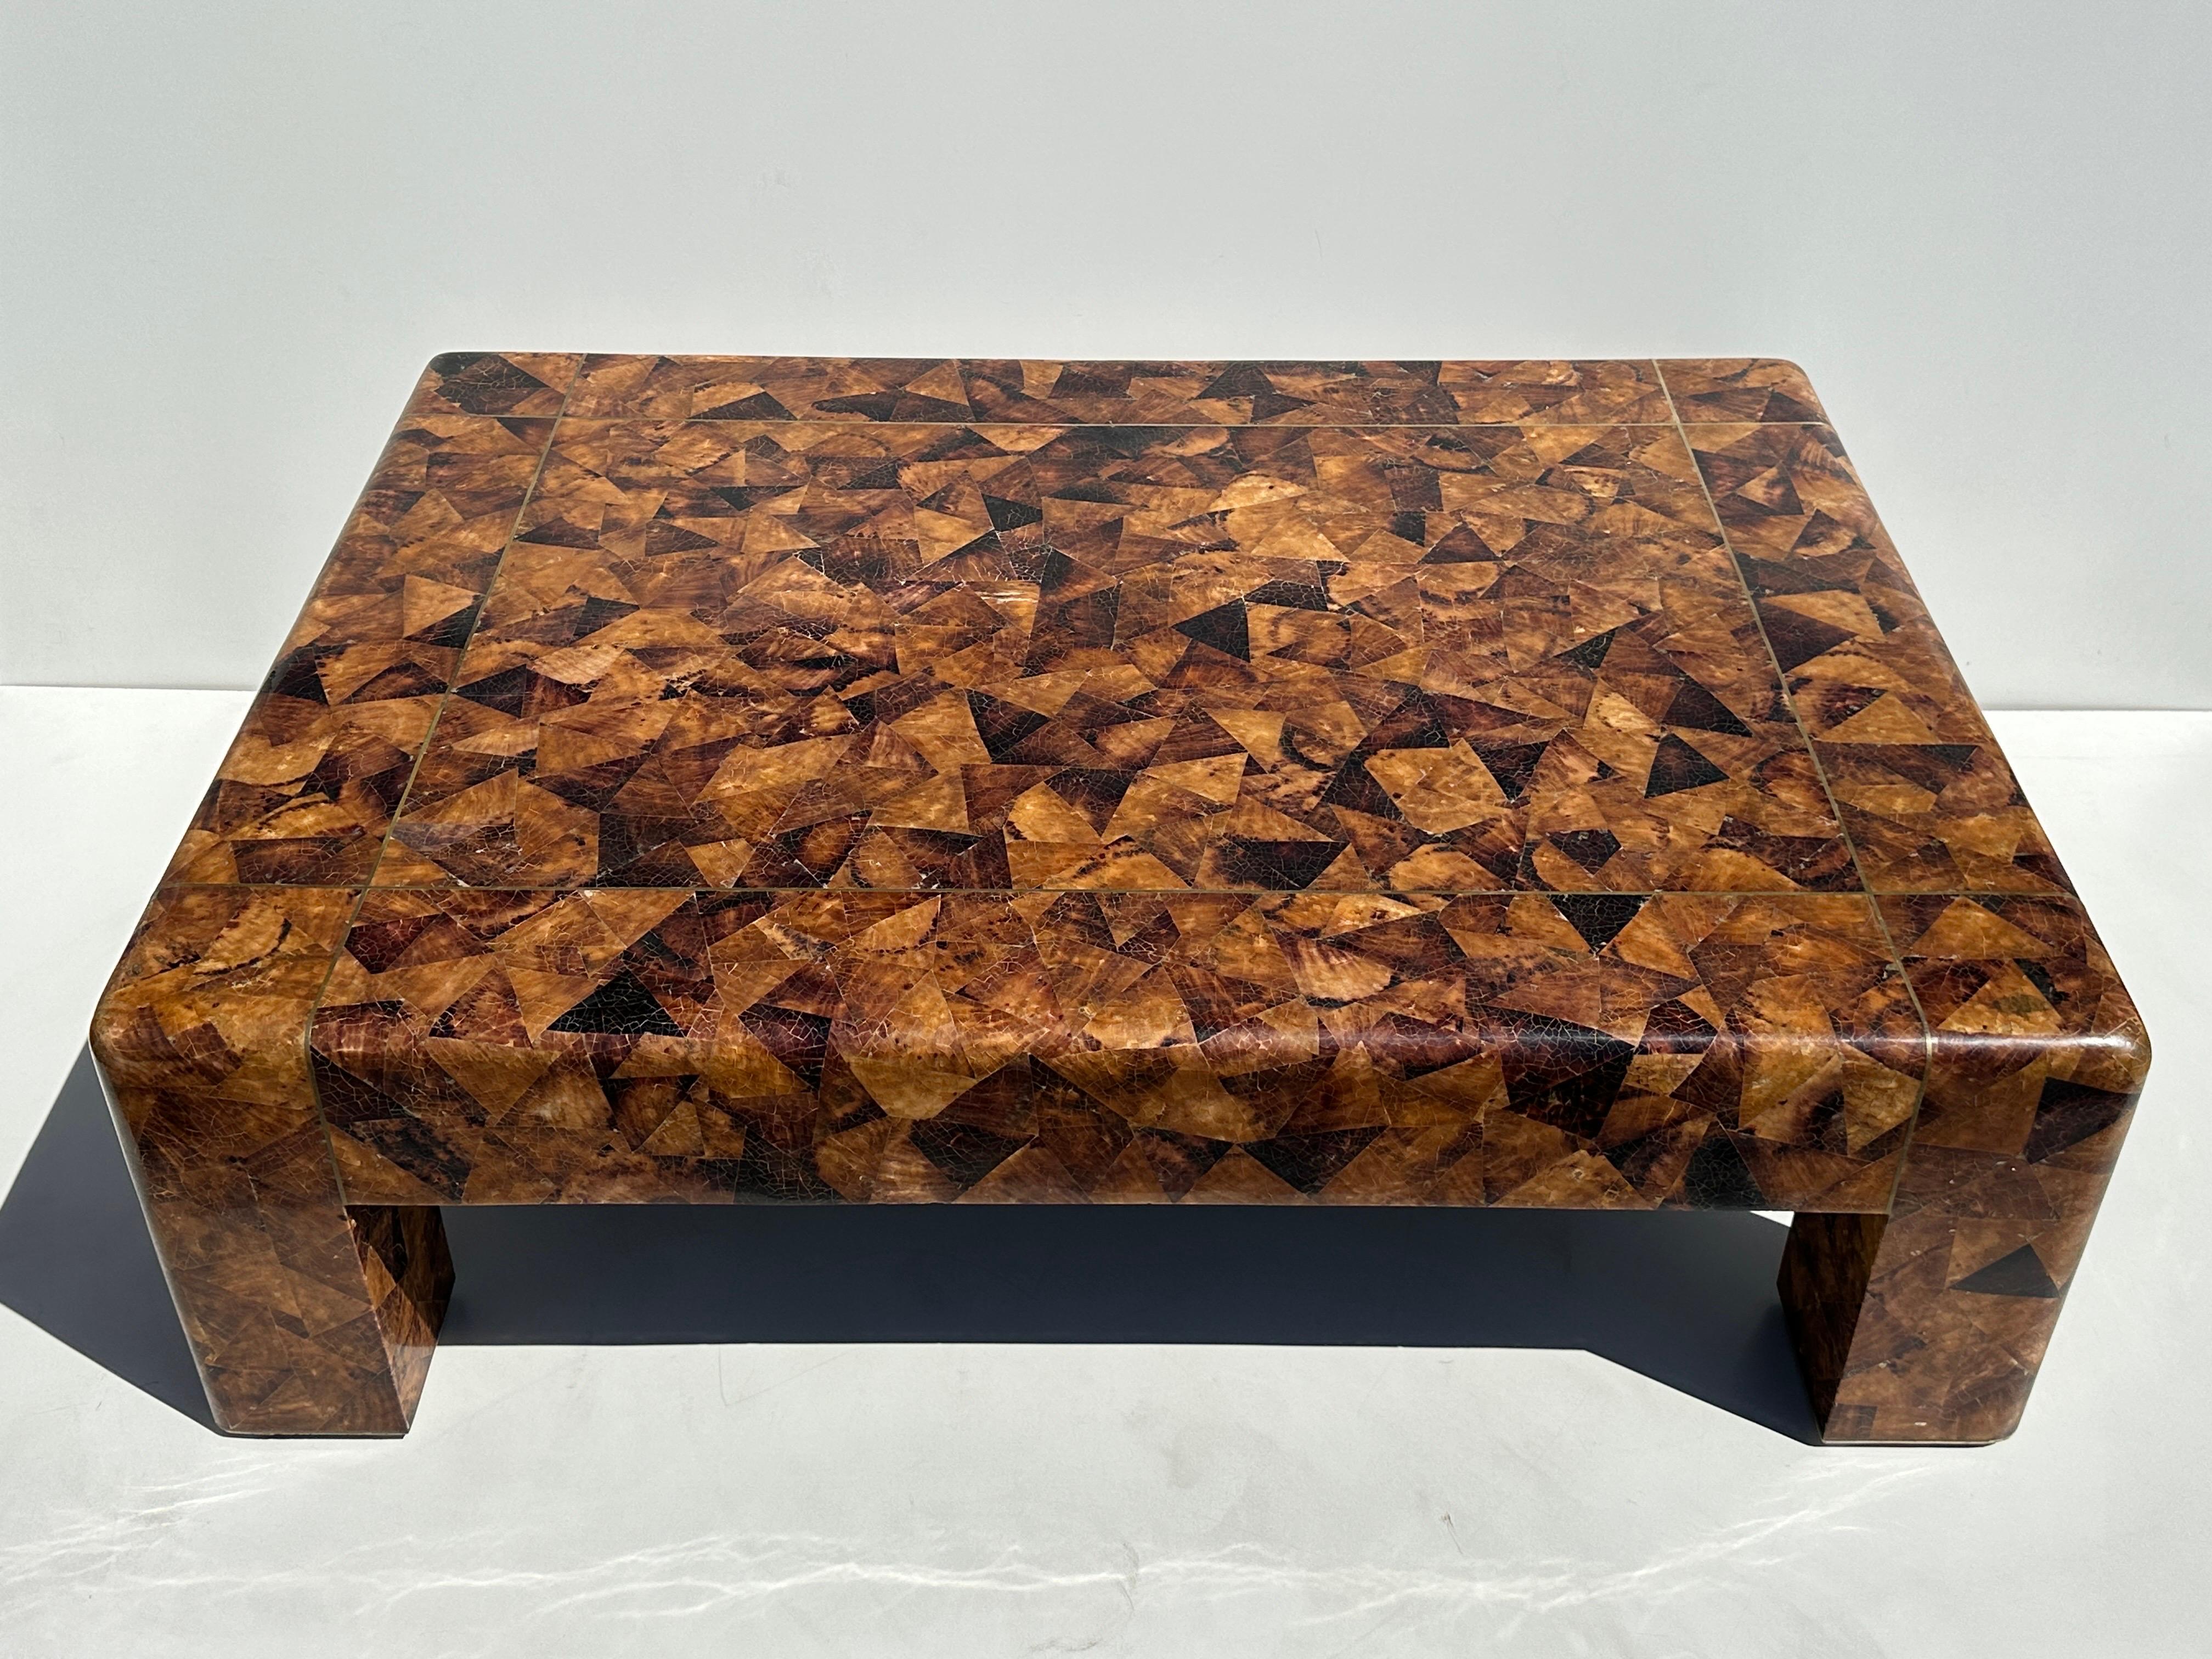 Karl Springer LTD tessellated penshell coffee table with brass trim.